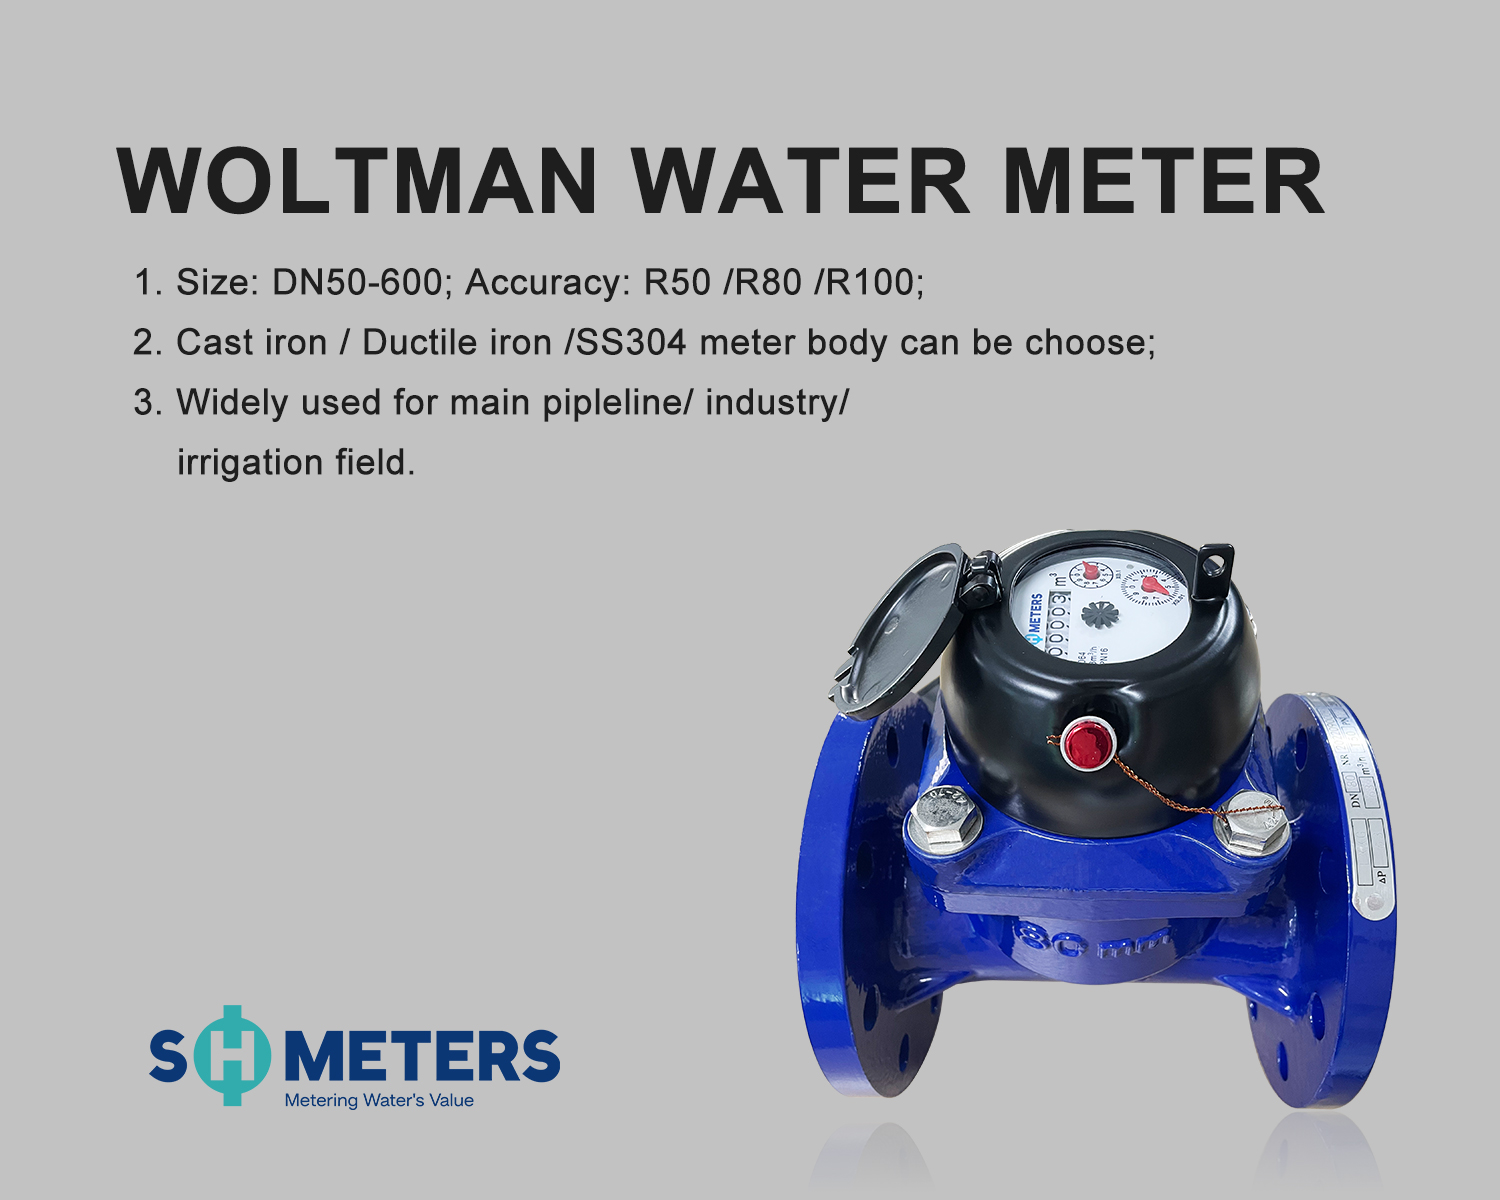 What is the range of applications for woltman water meter?